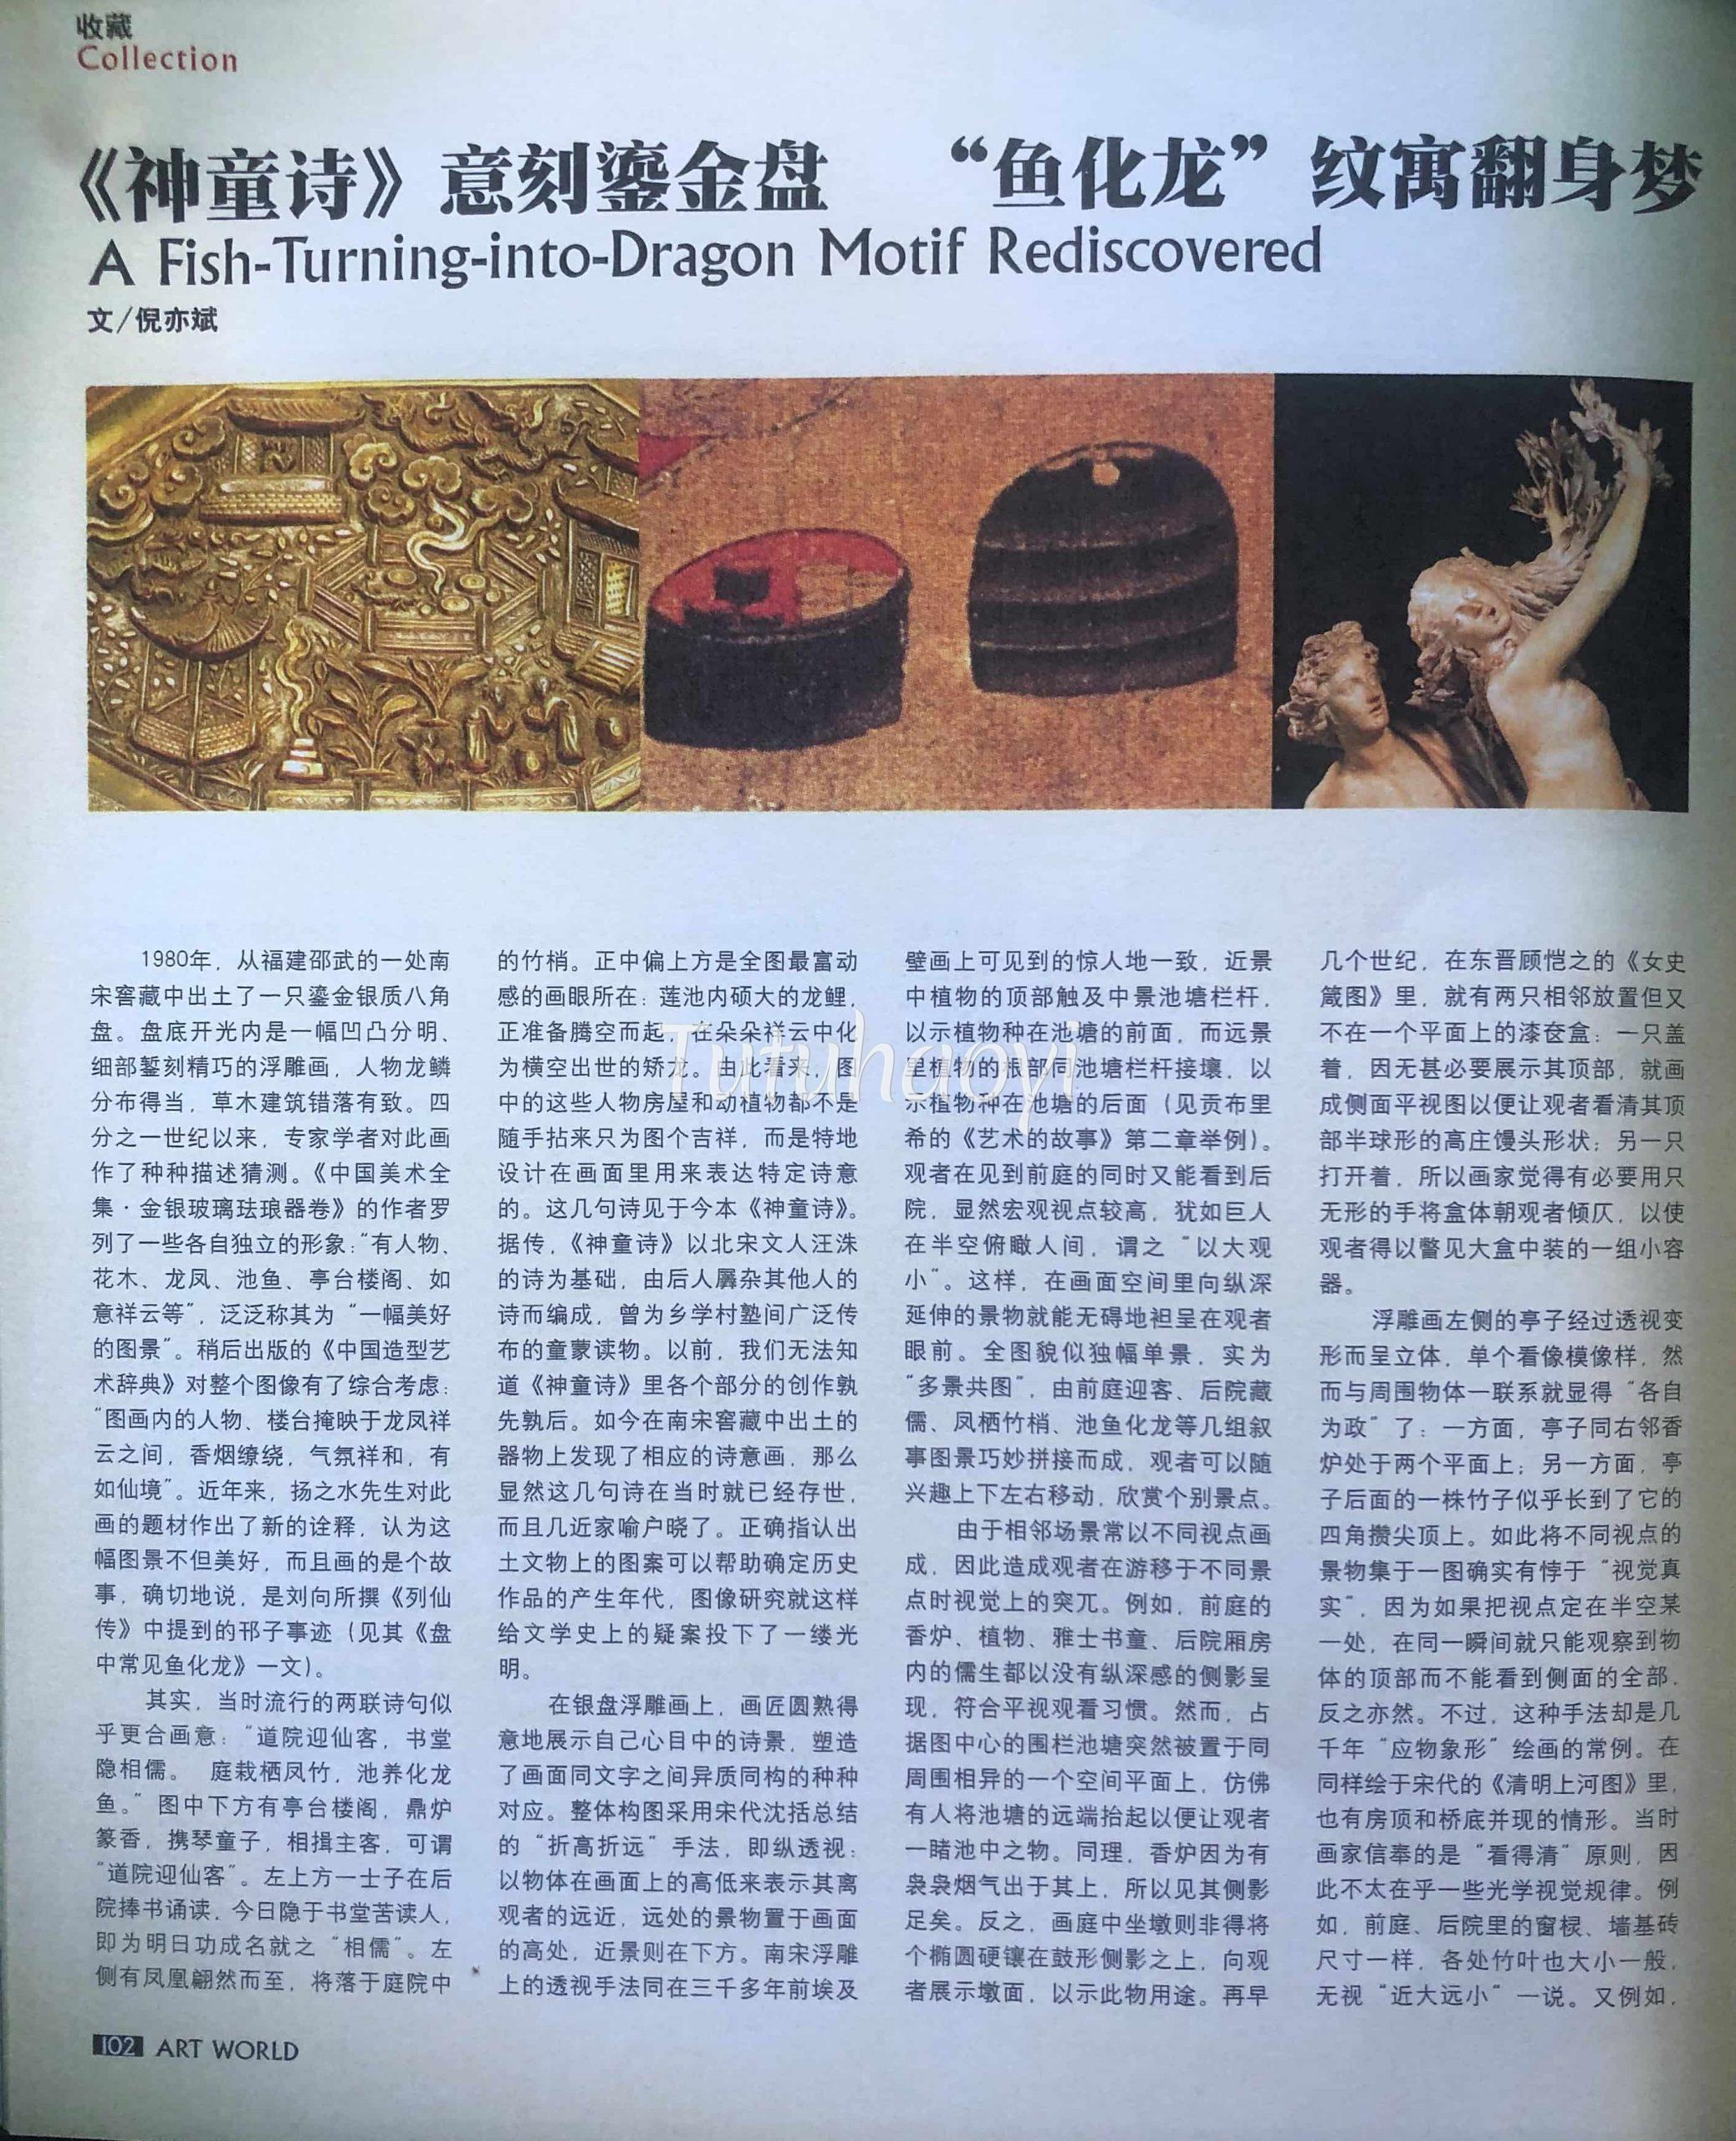 Dr Yibin Ni's publication on 'The Art World' journal in January 2008